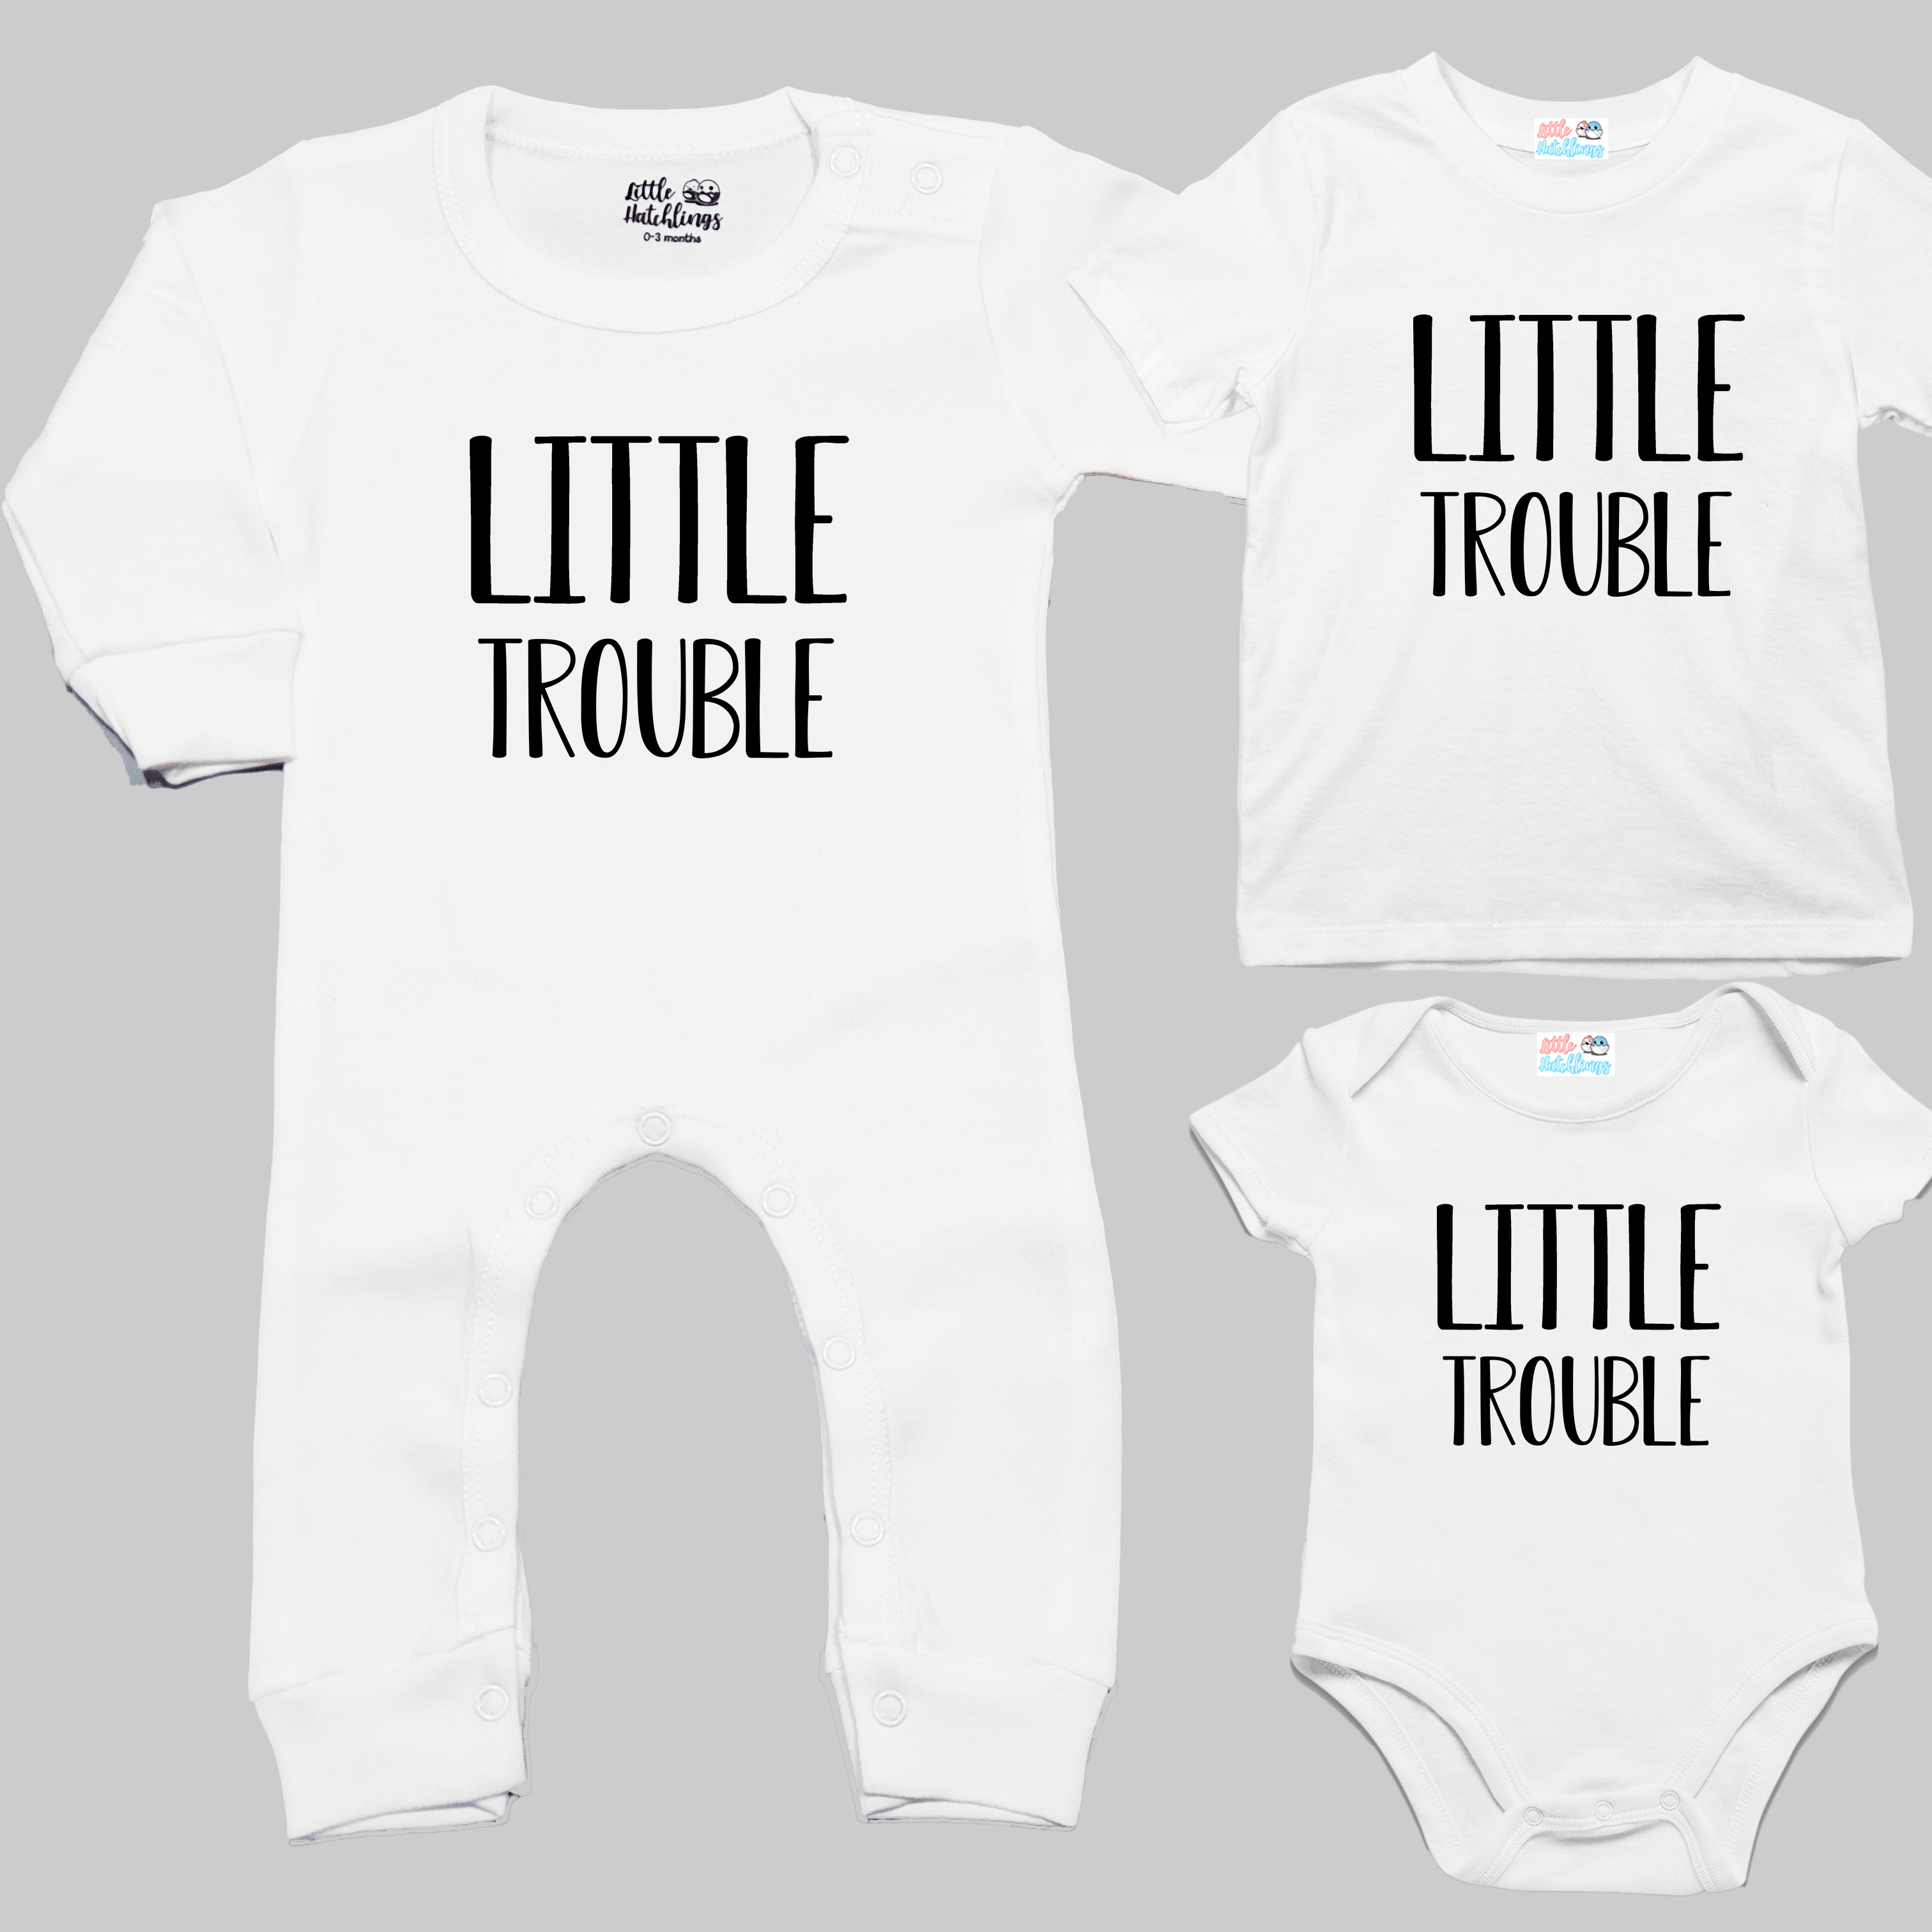 Big + Little Trouble White and Black Combo - Onesie + Adult T-shirt